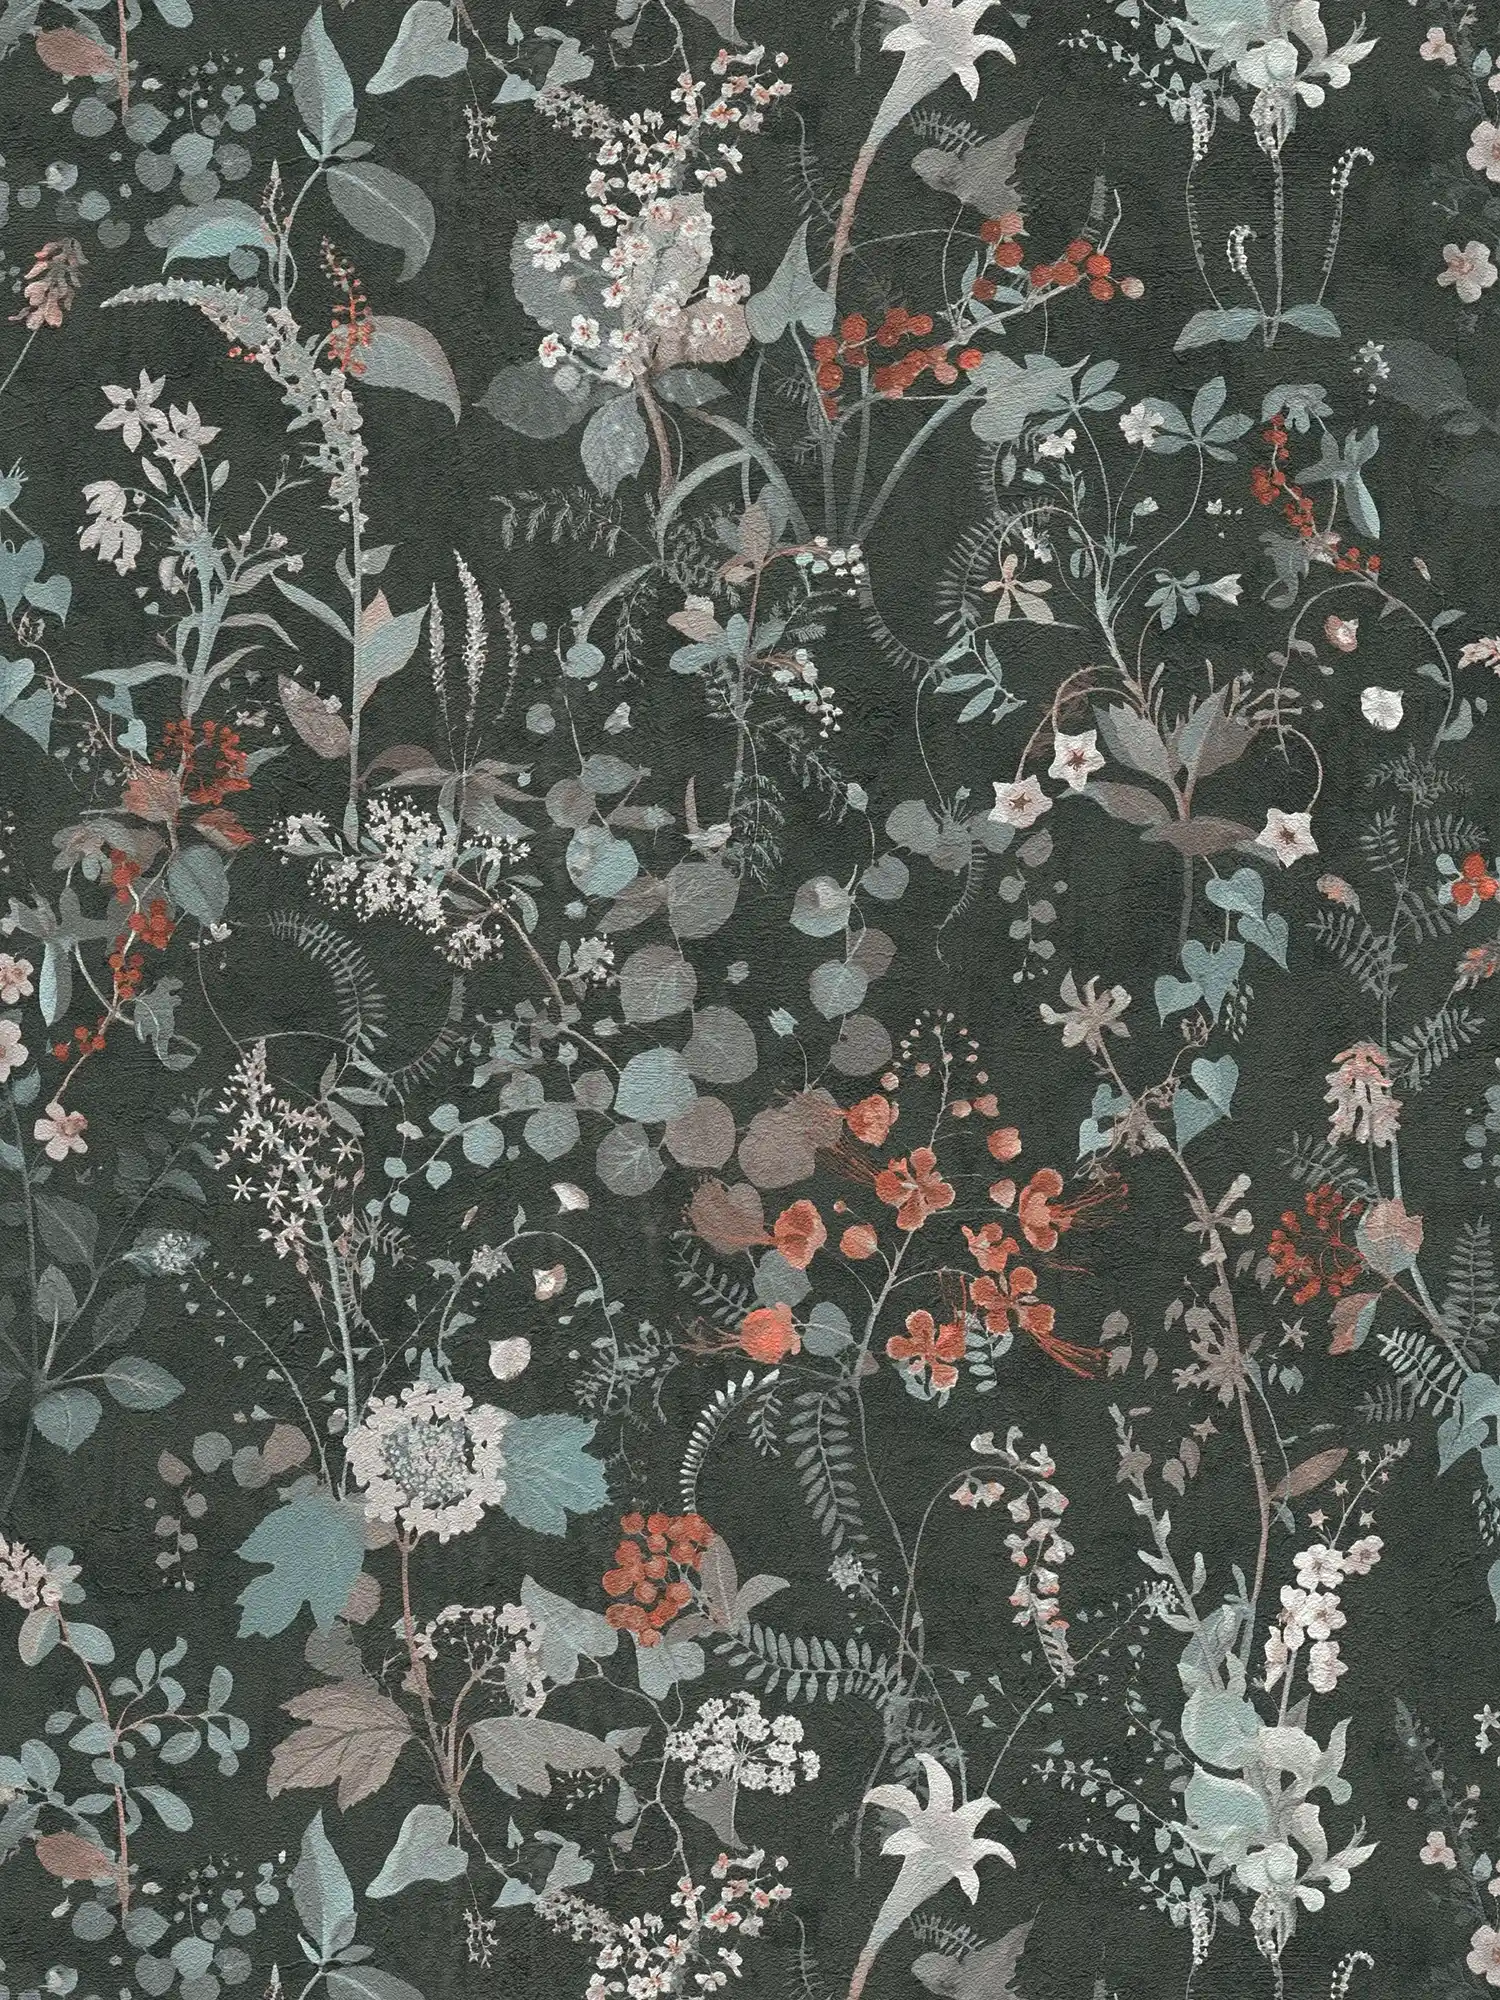         Black floral wallpaper with flowers pattern in grey and green
    